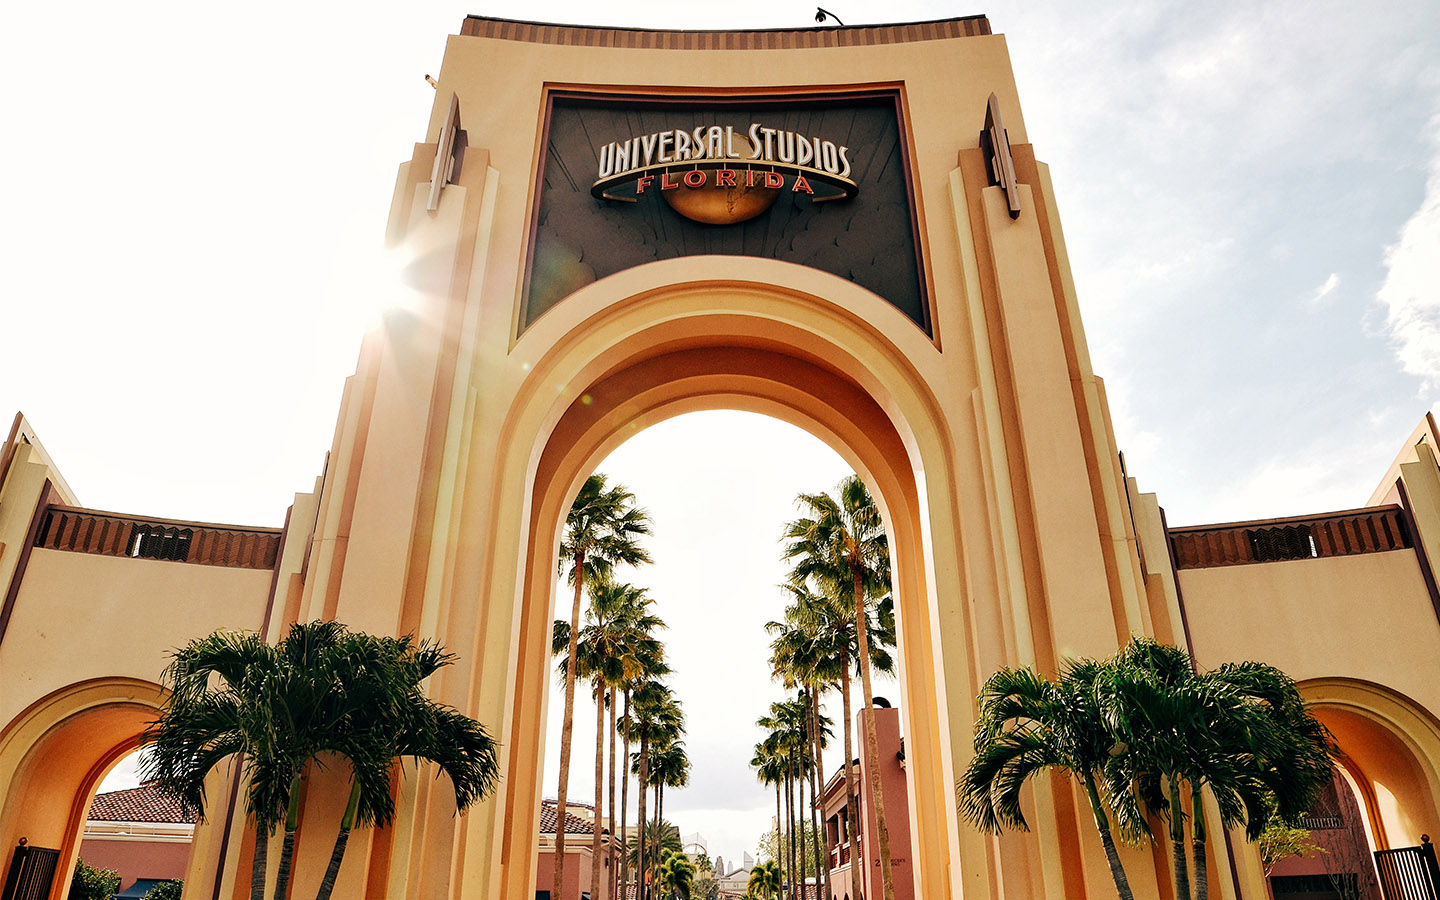 10 Things You HAVE to Do at Universal Studios Florida